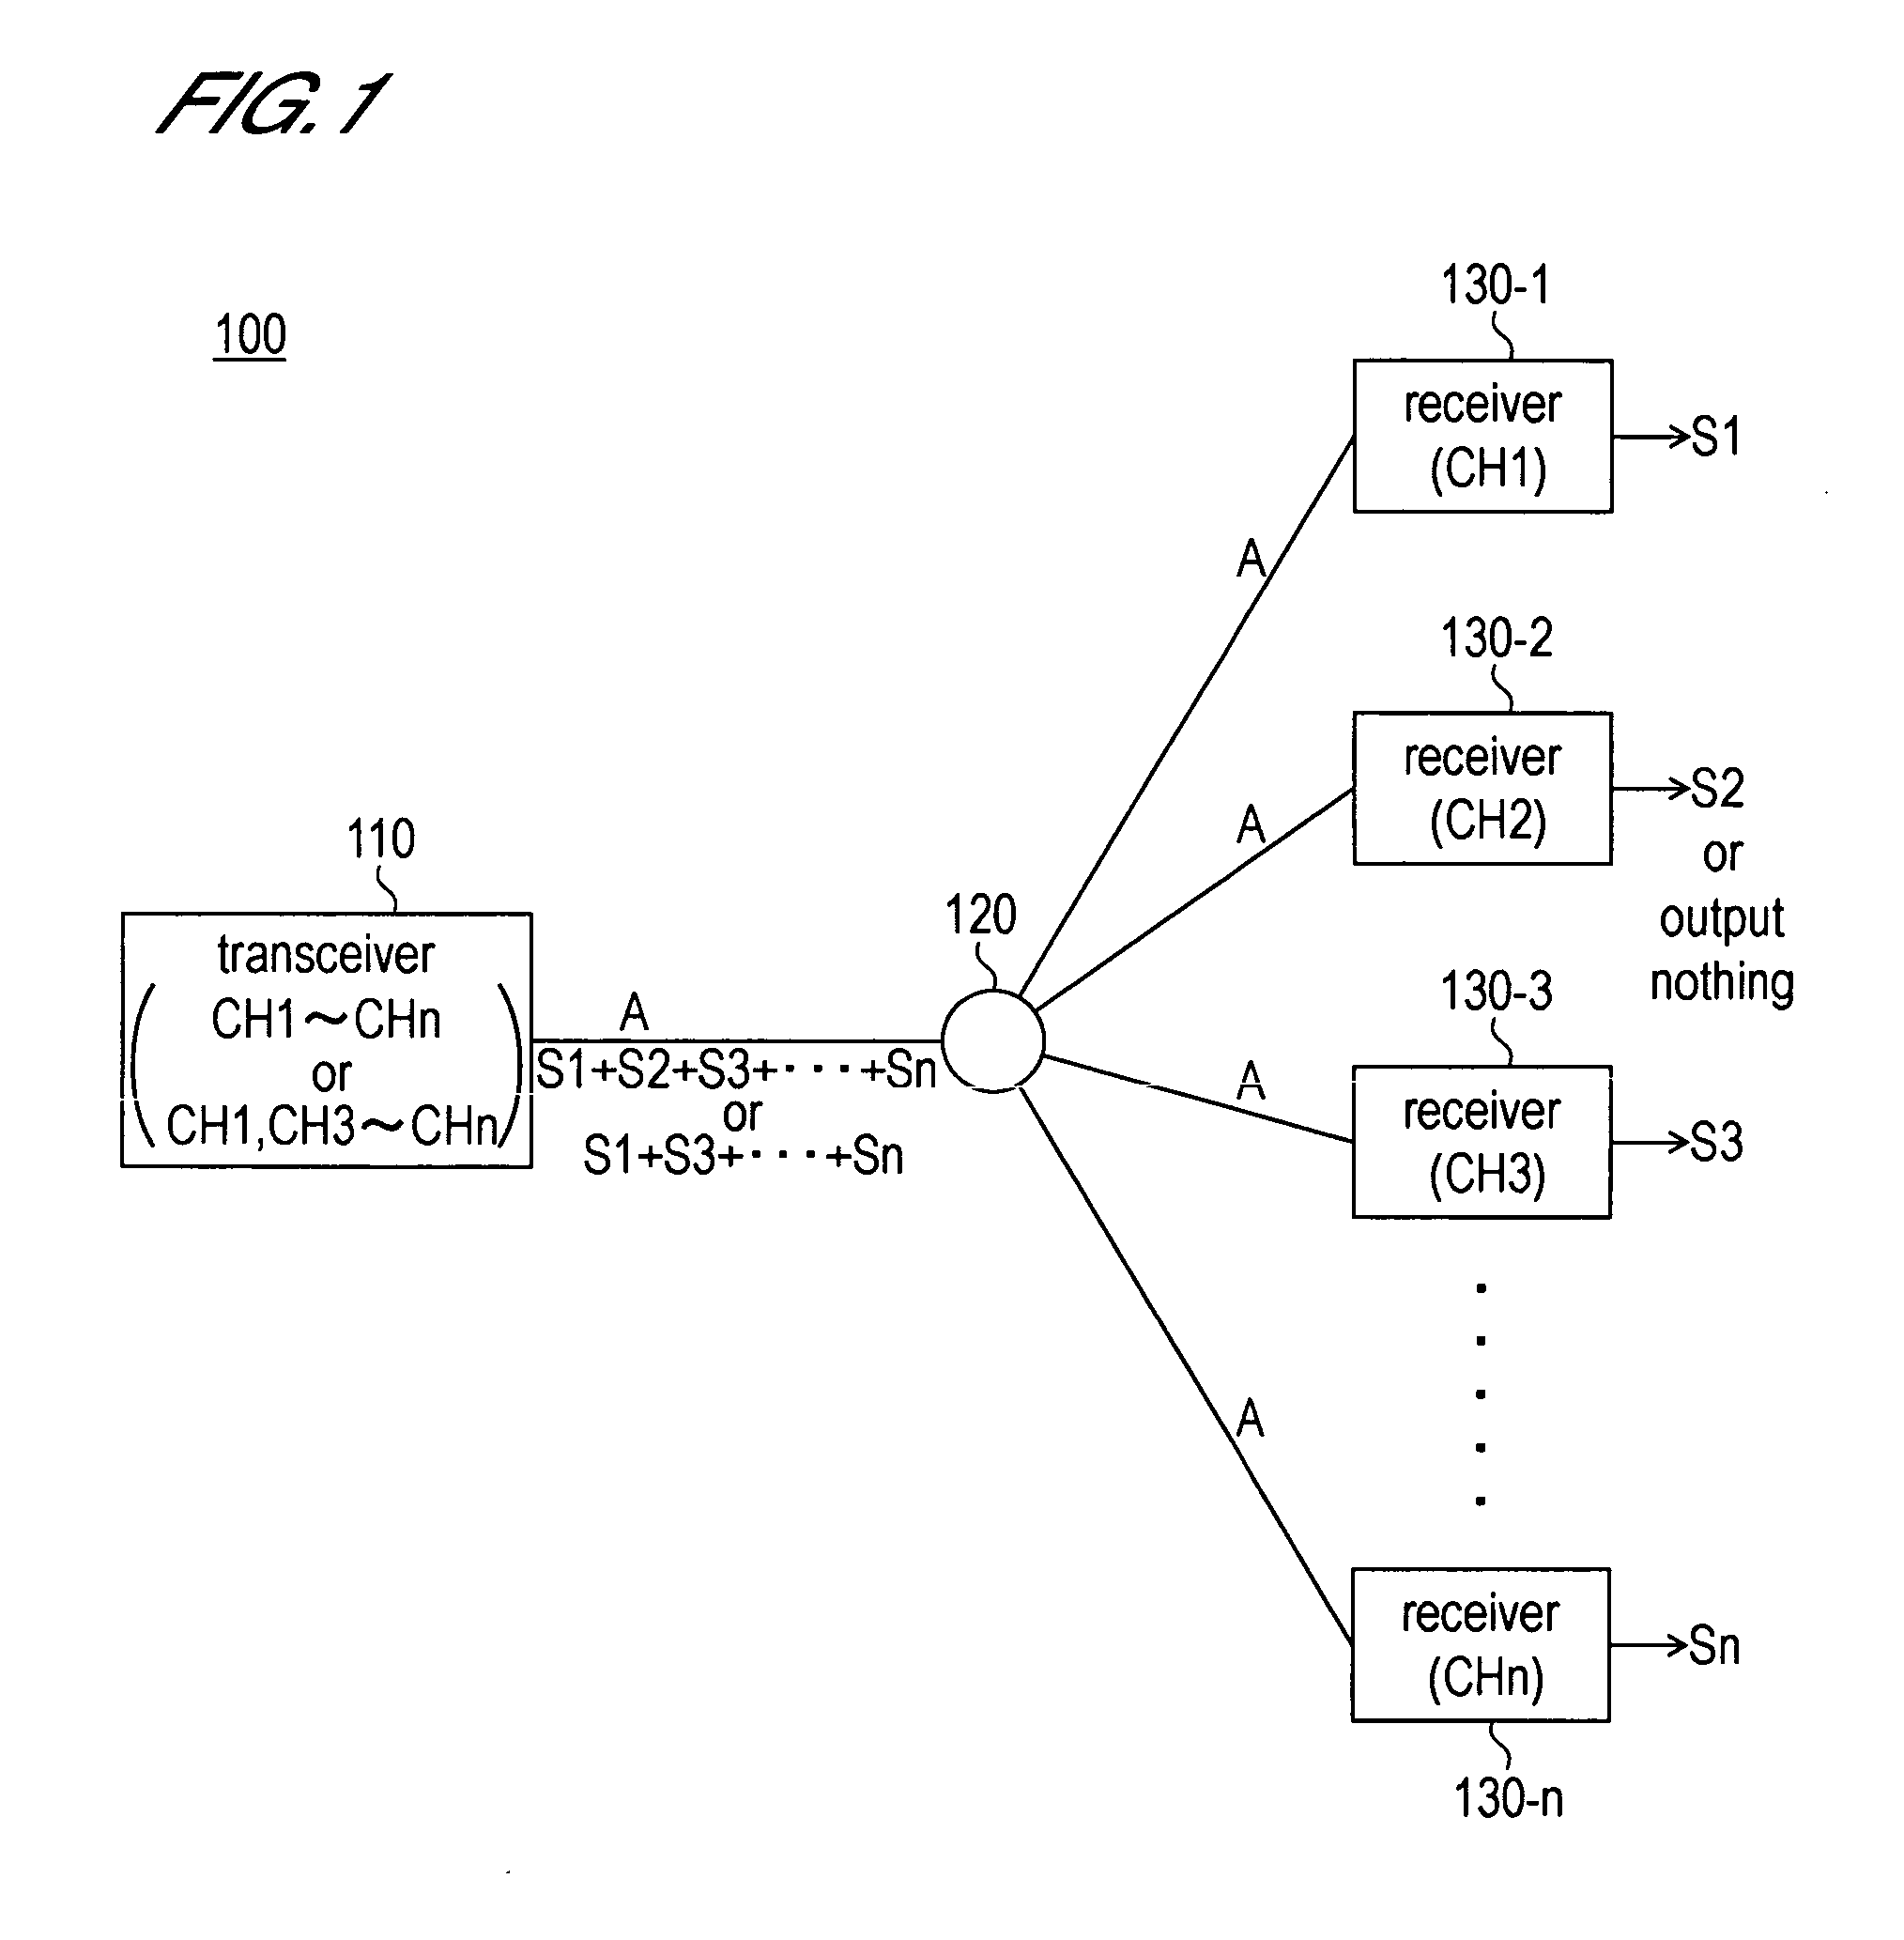 Code division multiplexing communication system